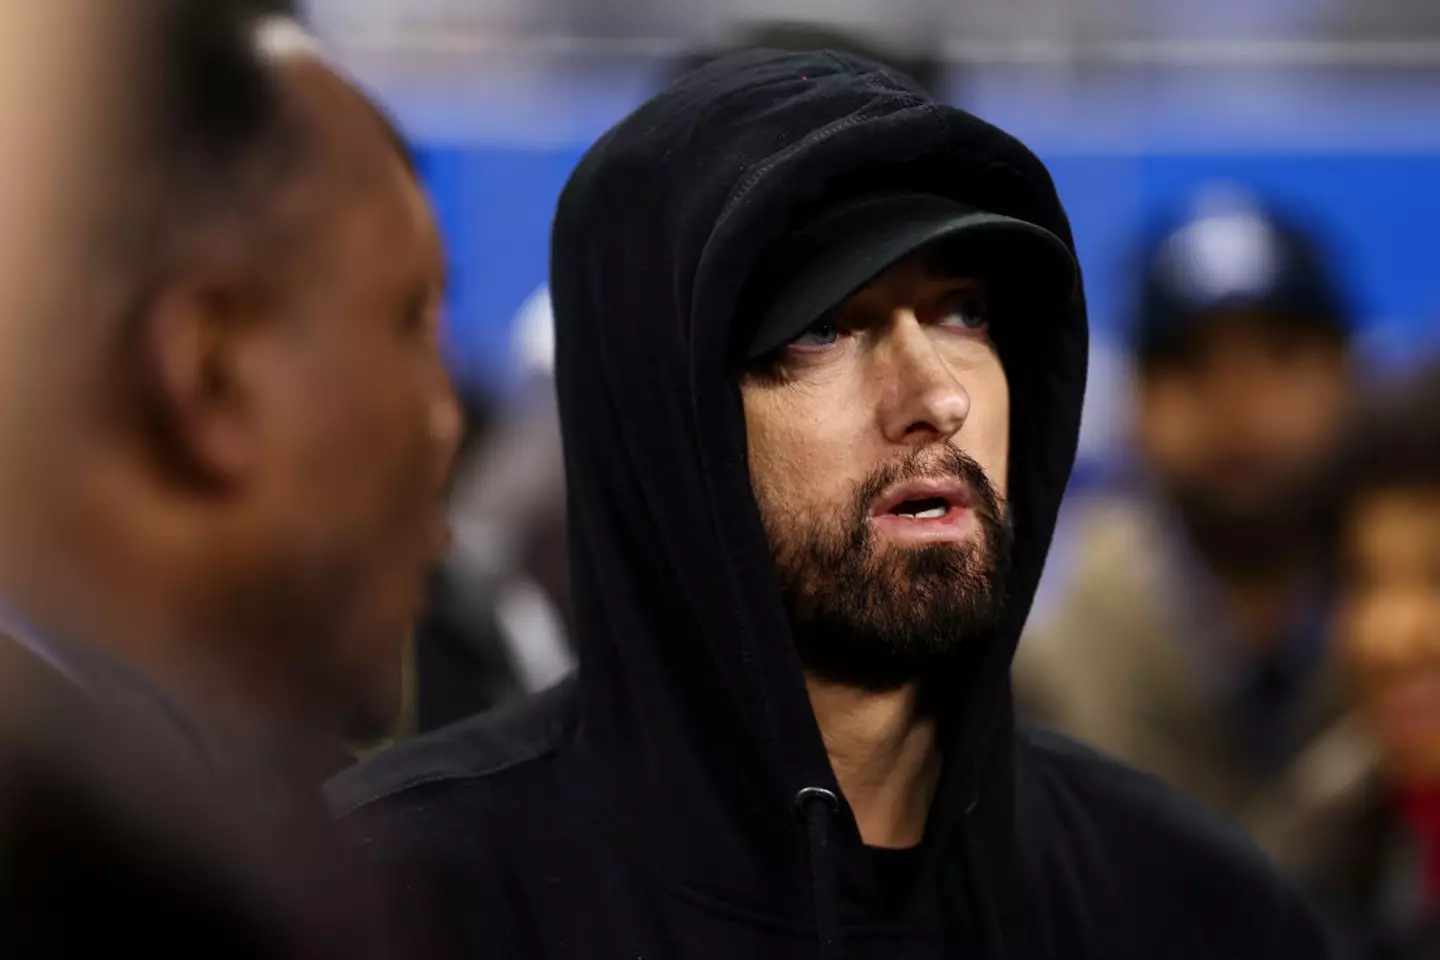 Eminem has rapped about his mother and upbringing in several different tracks.